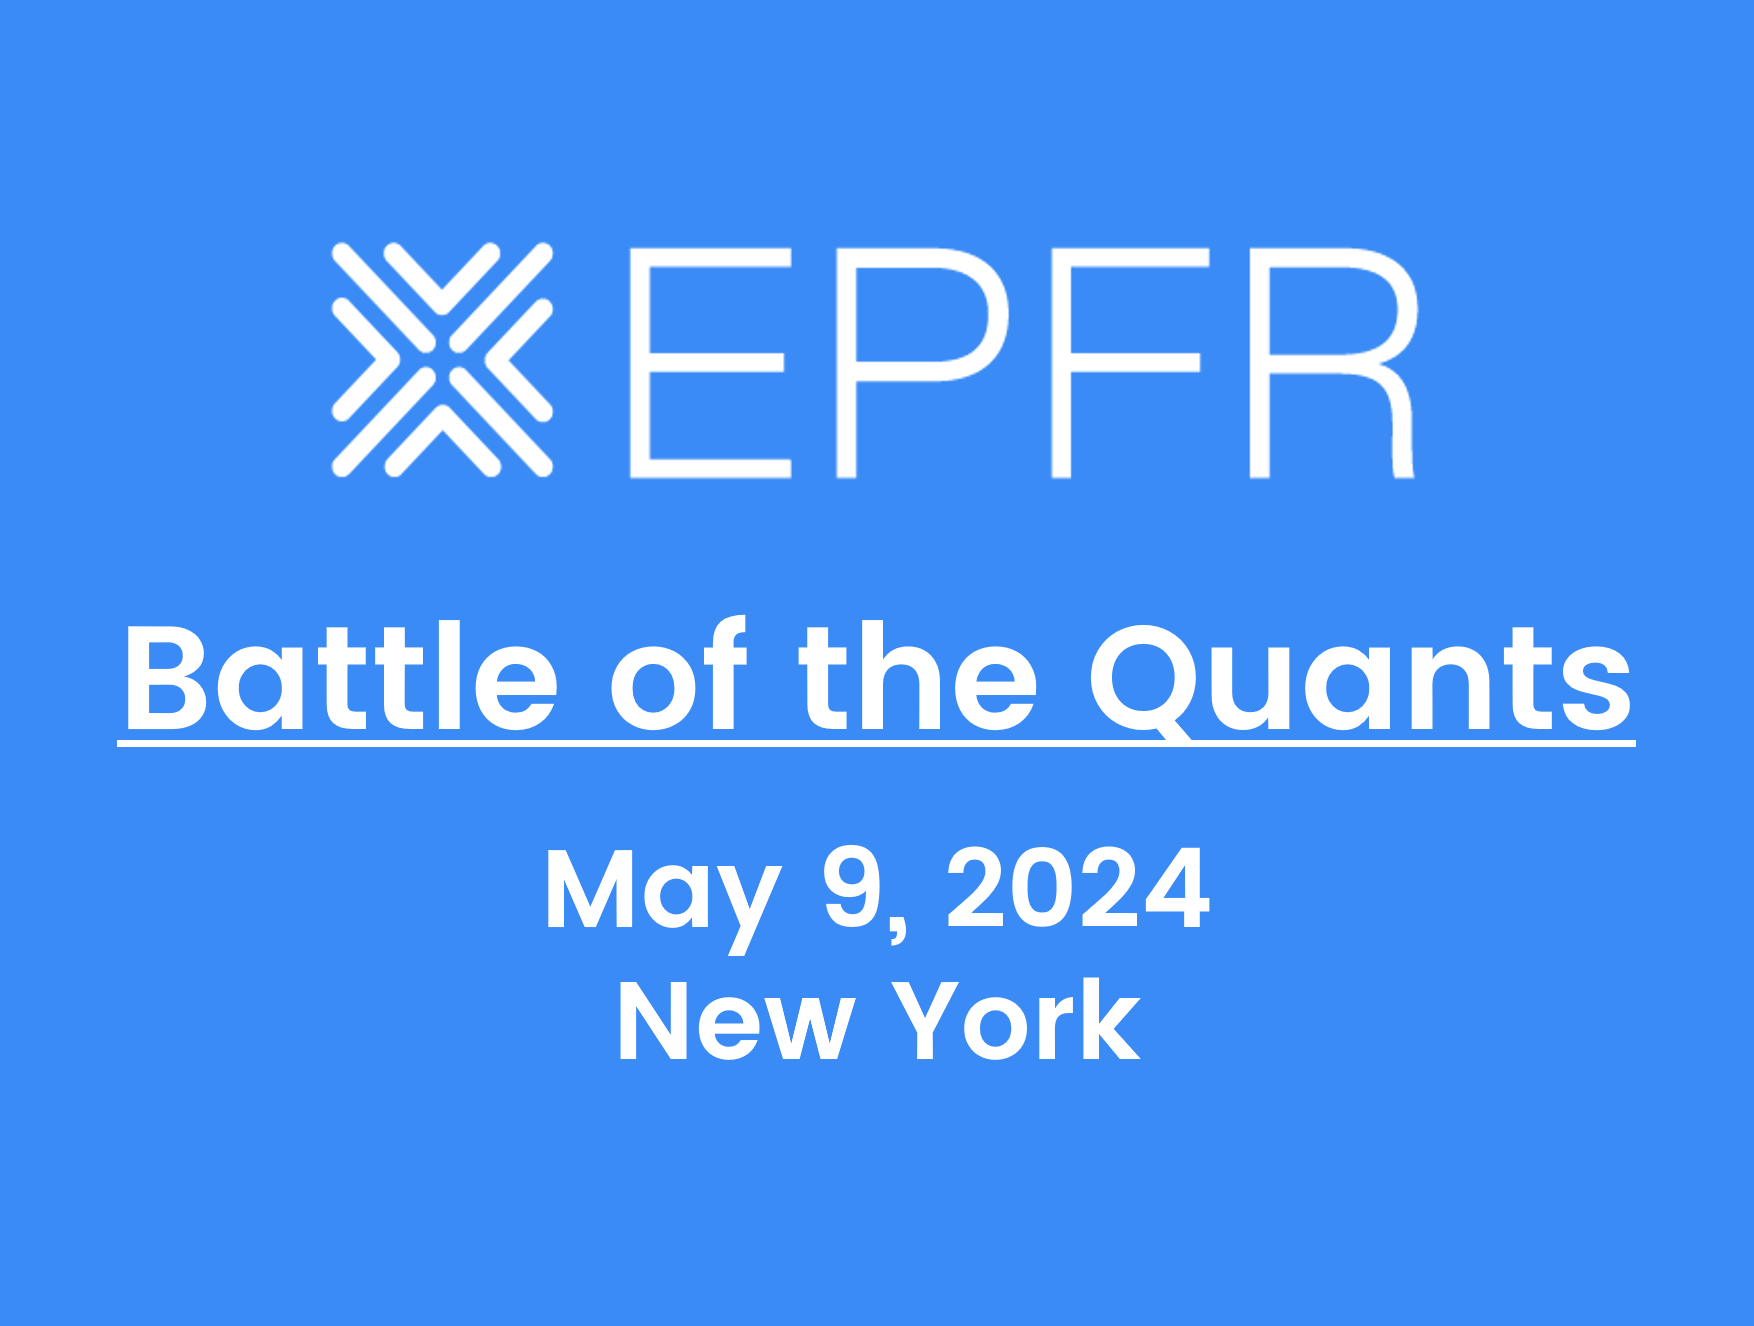 "Battle of the Quants, May 9, 2024, New York"